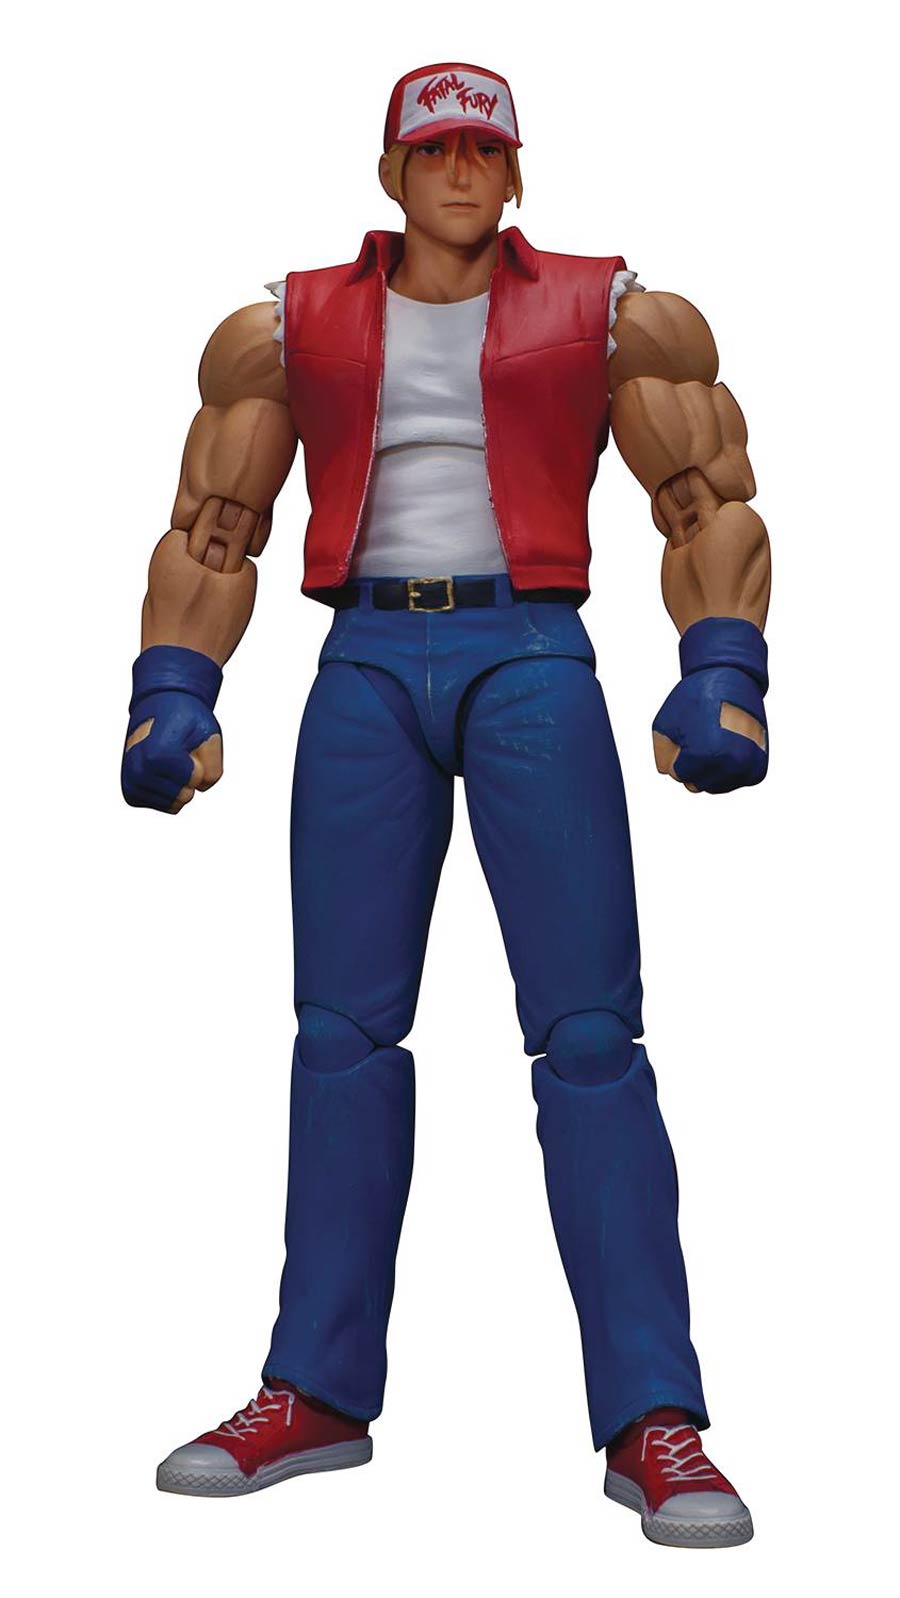 Omega Rugal from The King of Fighters '98: Ultimate Match